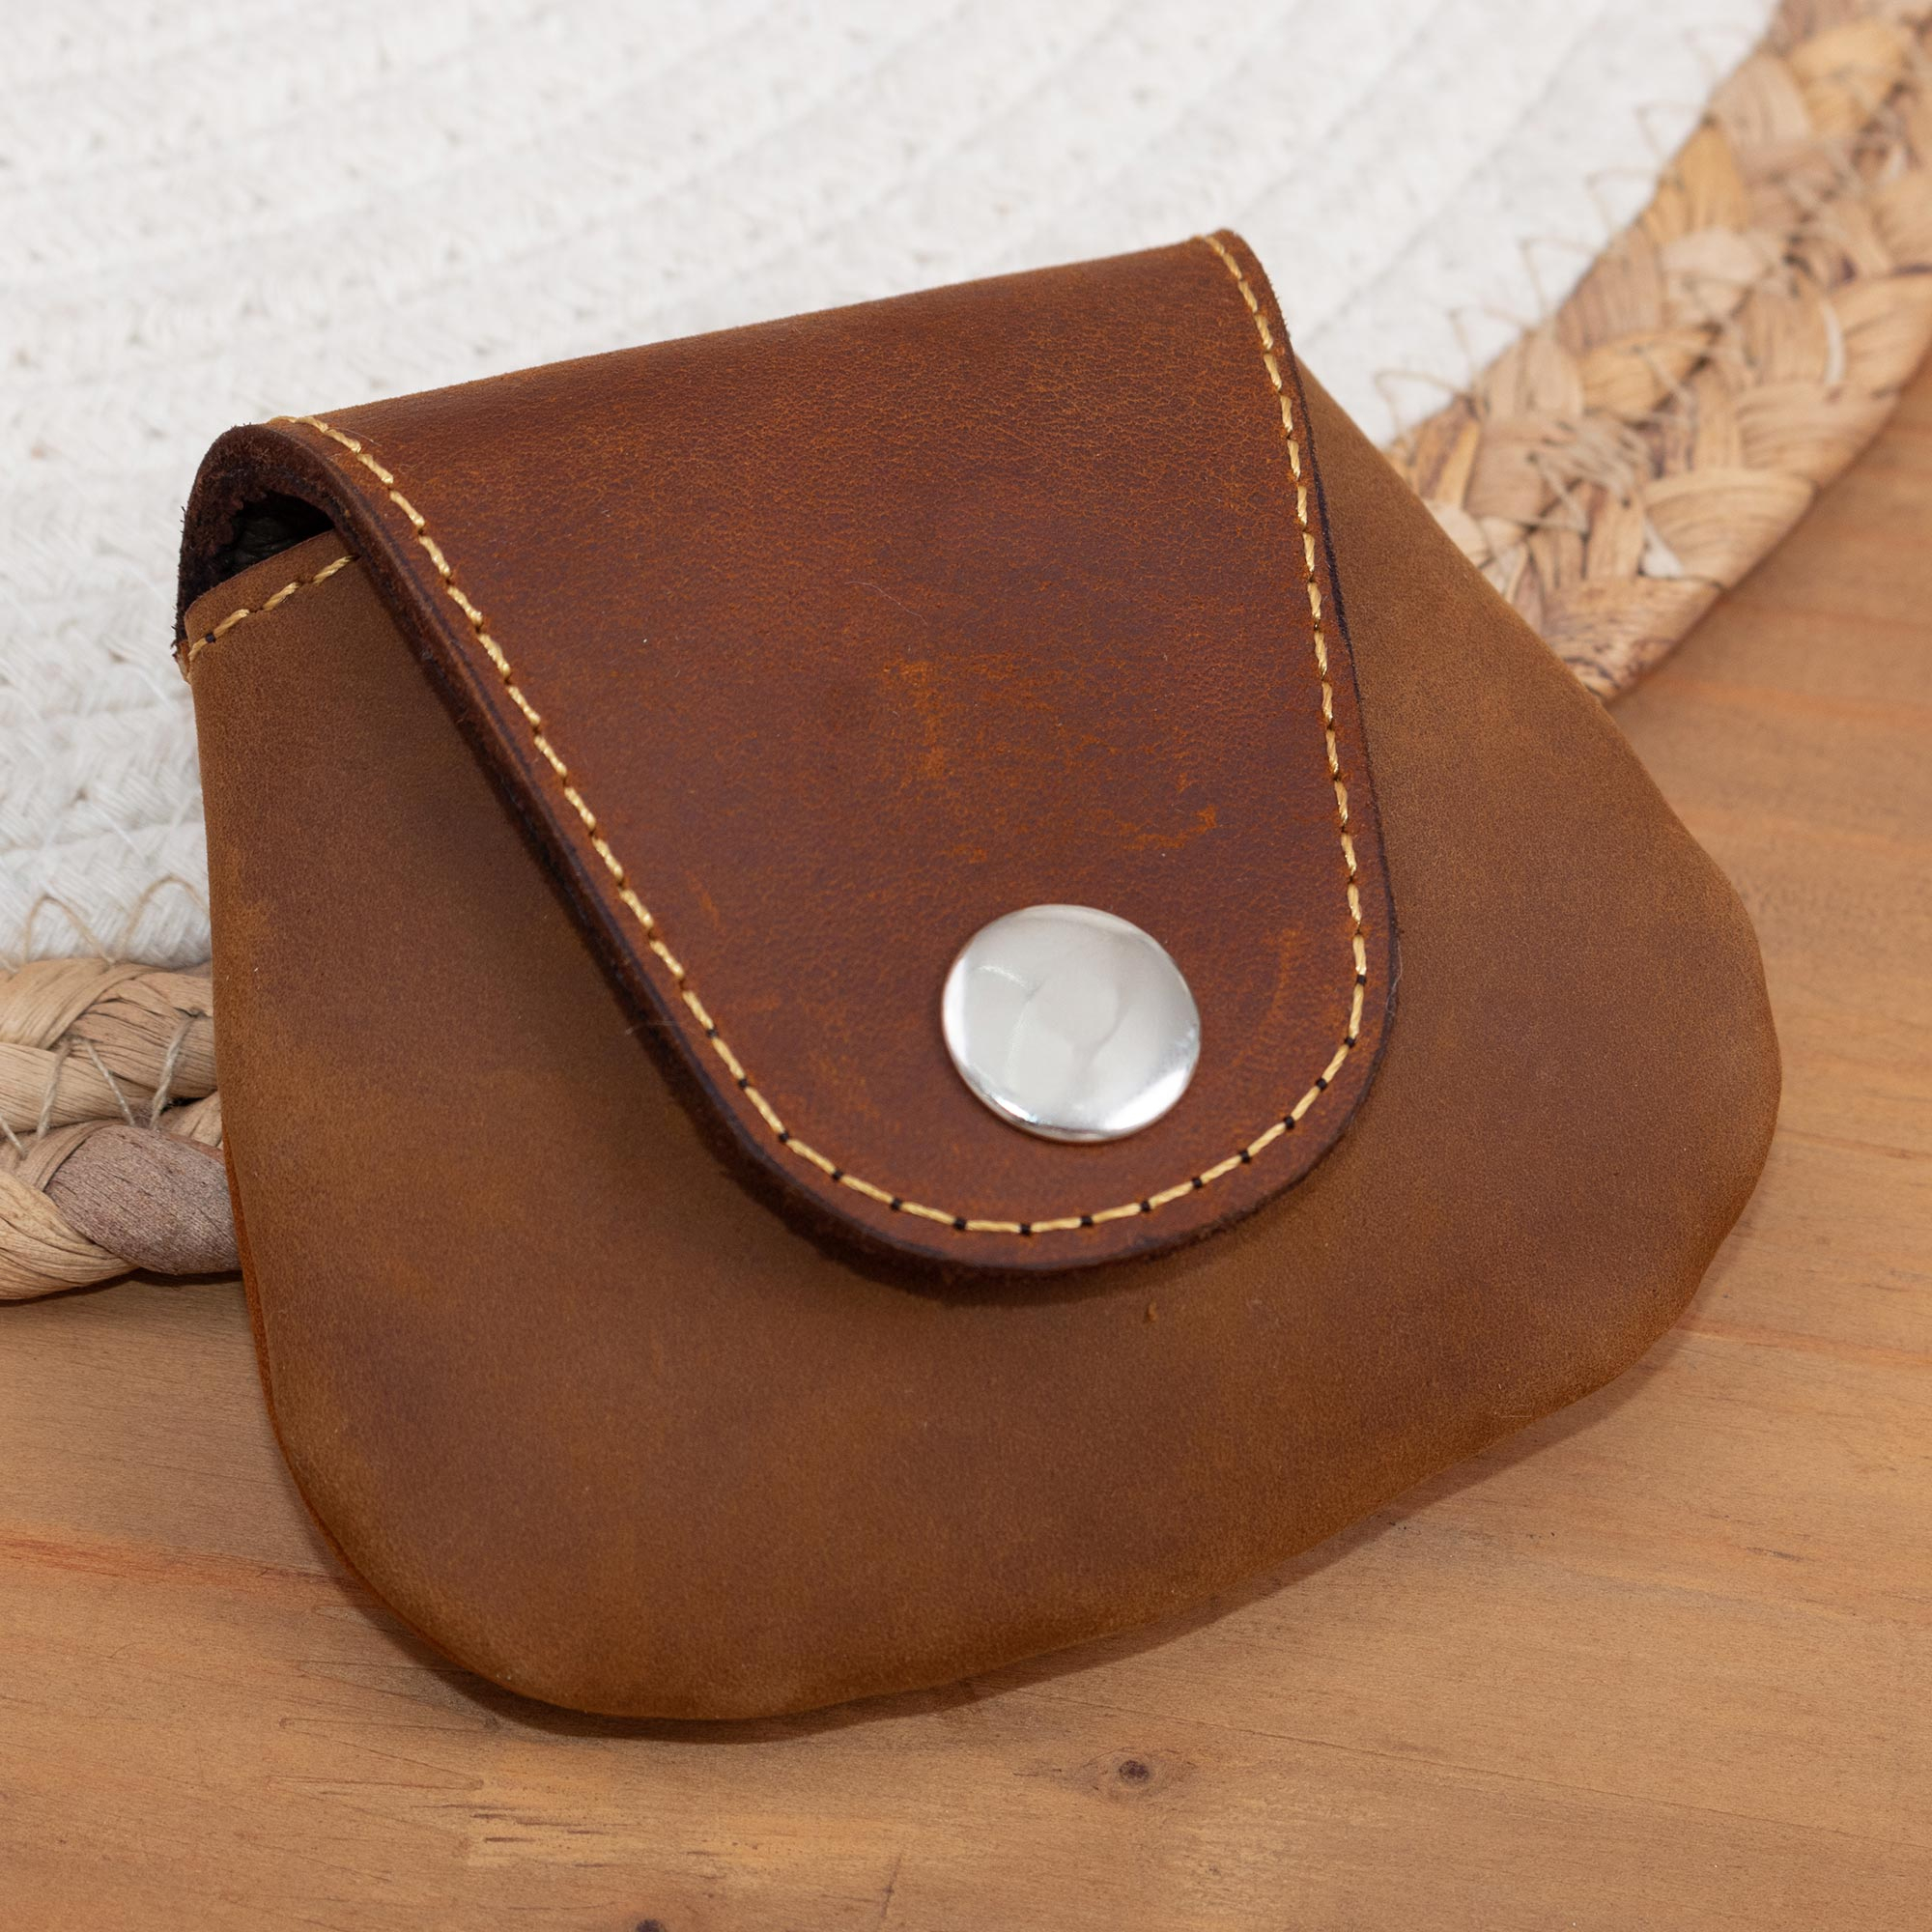 Unisex Brown Leather Coin Purse - Spare Change